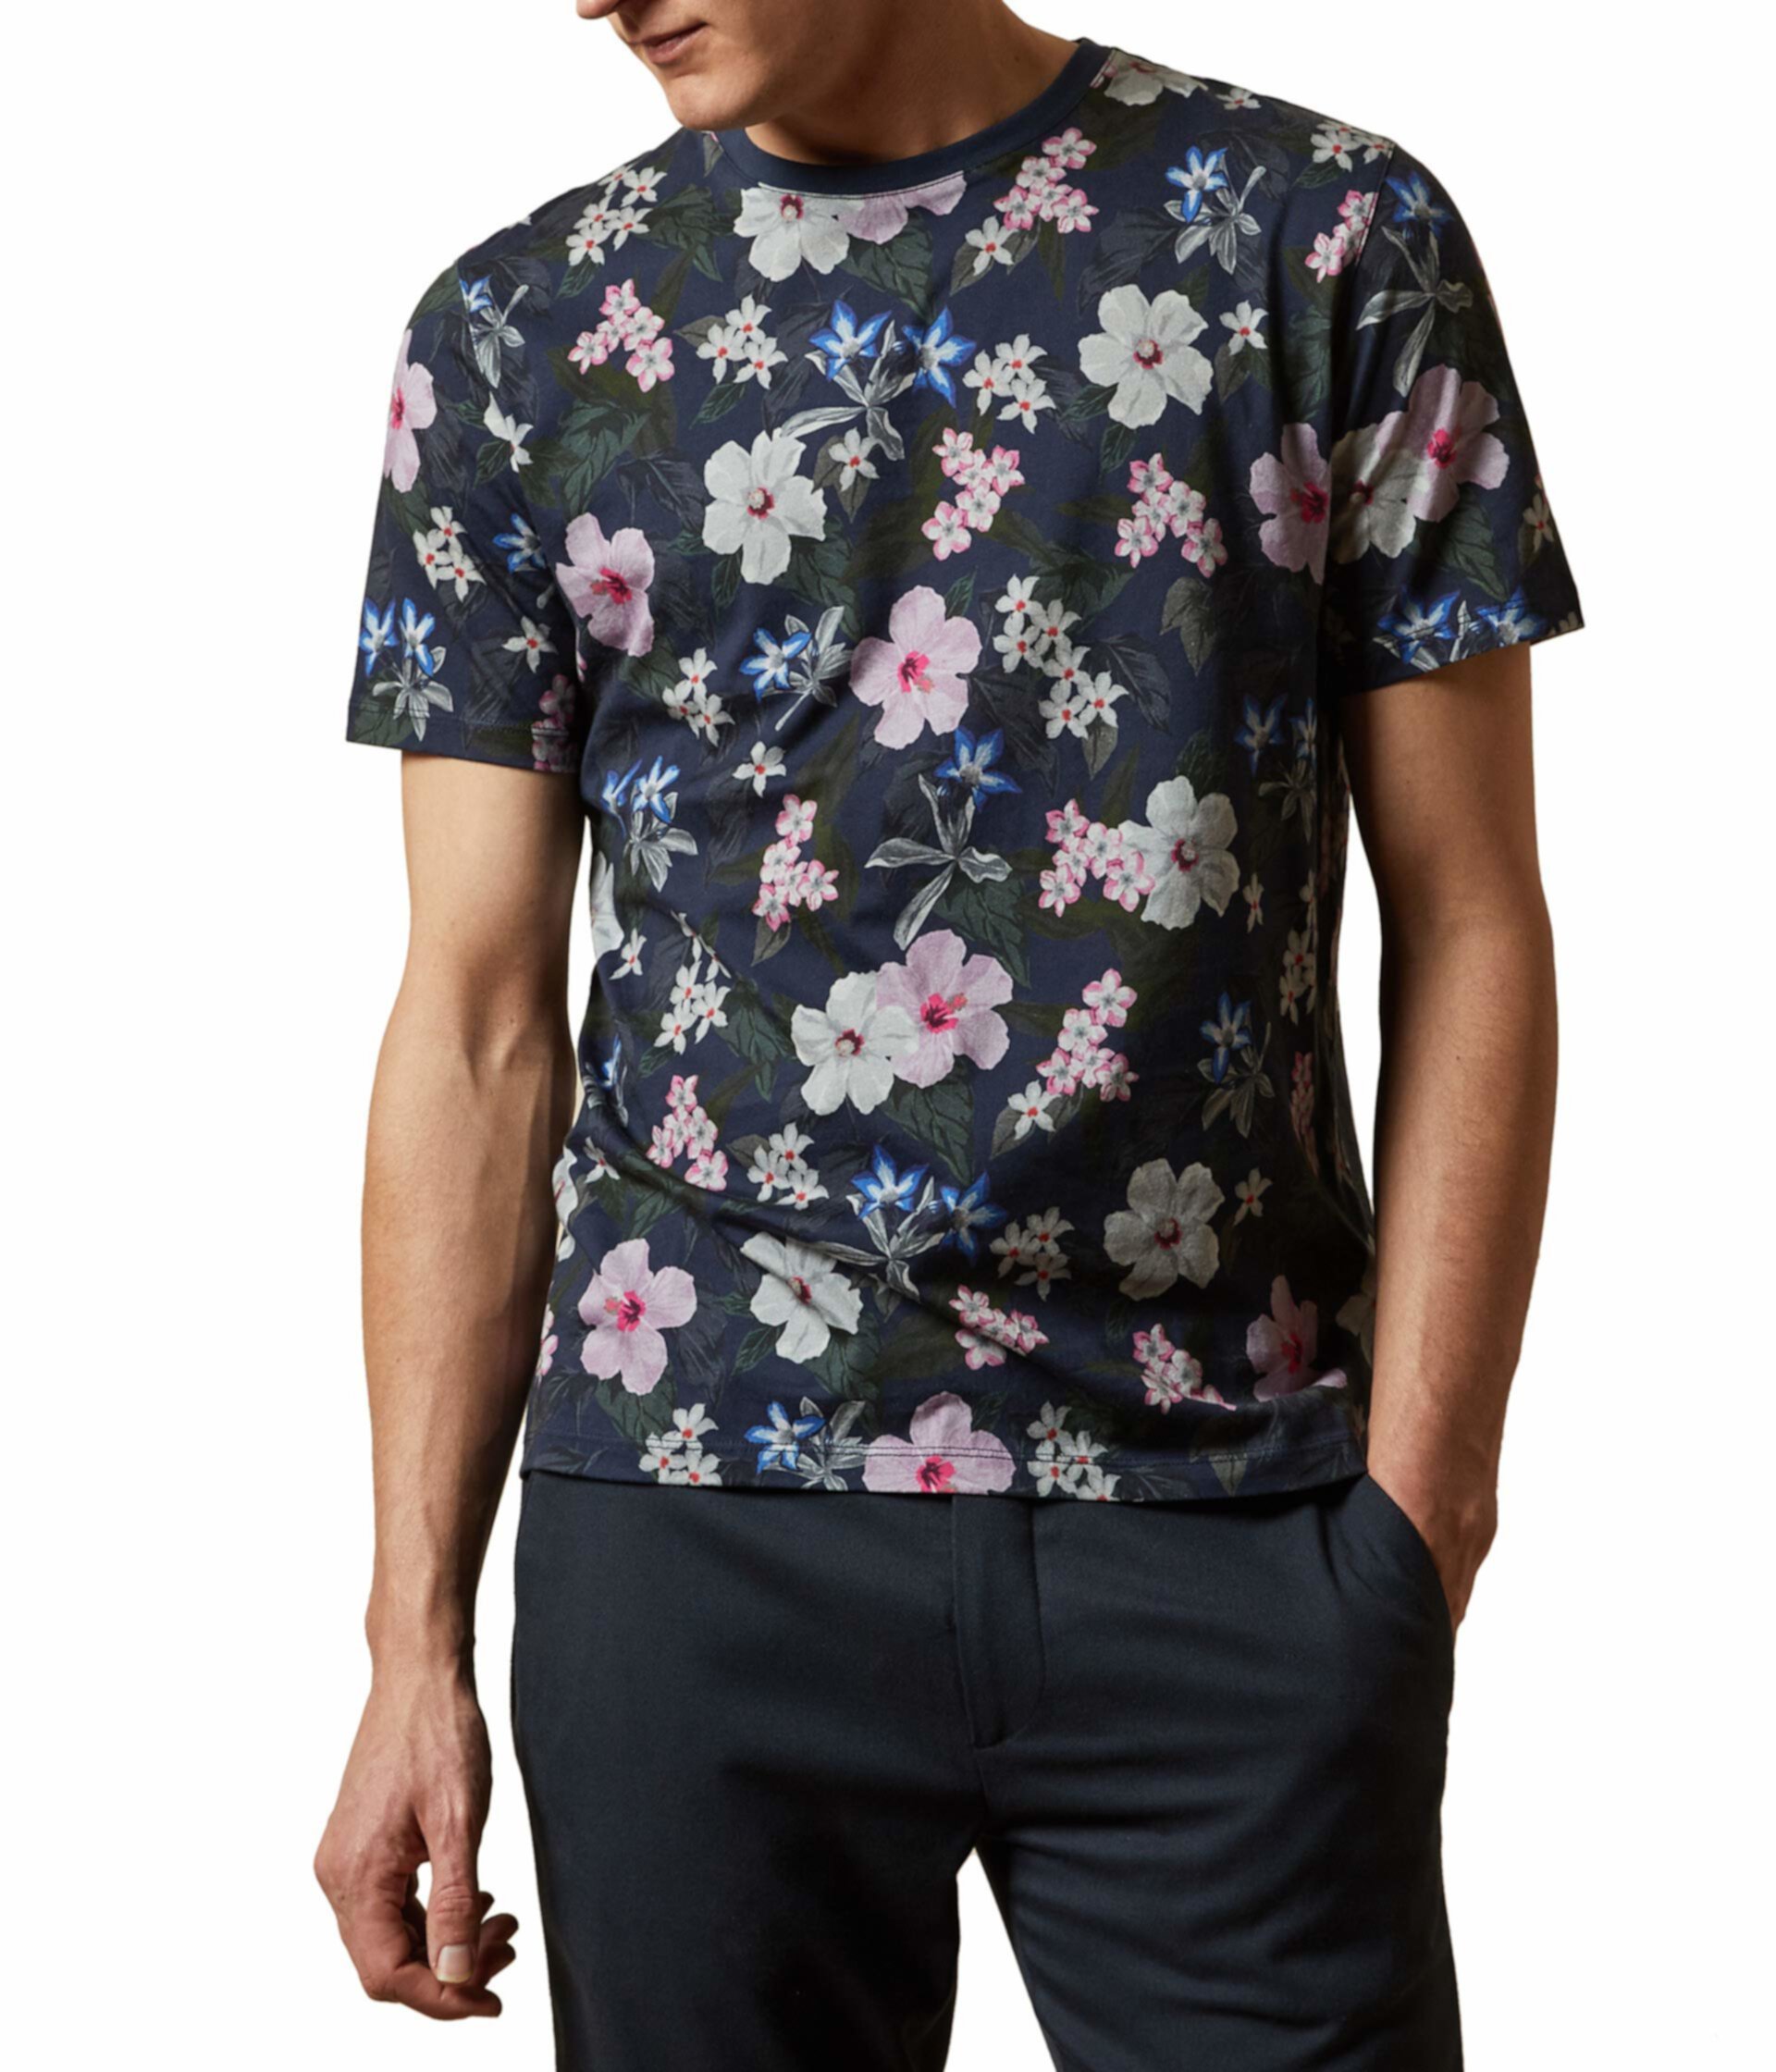 Juicey Shirt Ted Baker